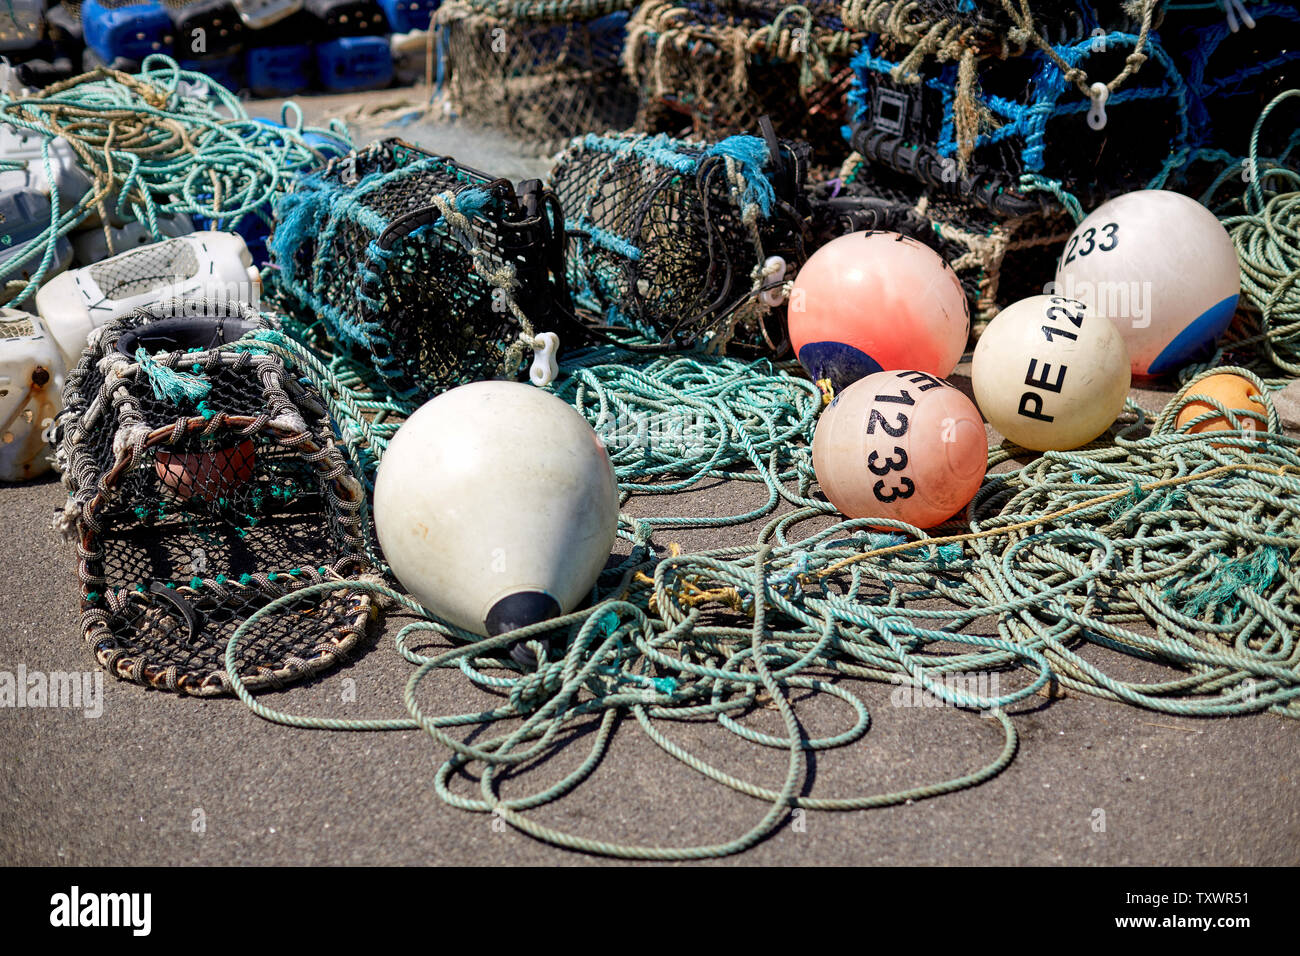 Fishing tackle and lobster pots on the harbour at Mudeford Quay, Dorset. Part of the British fishing industry. Stock Photo